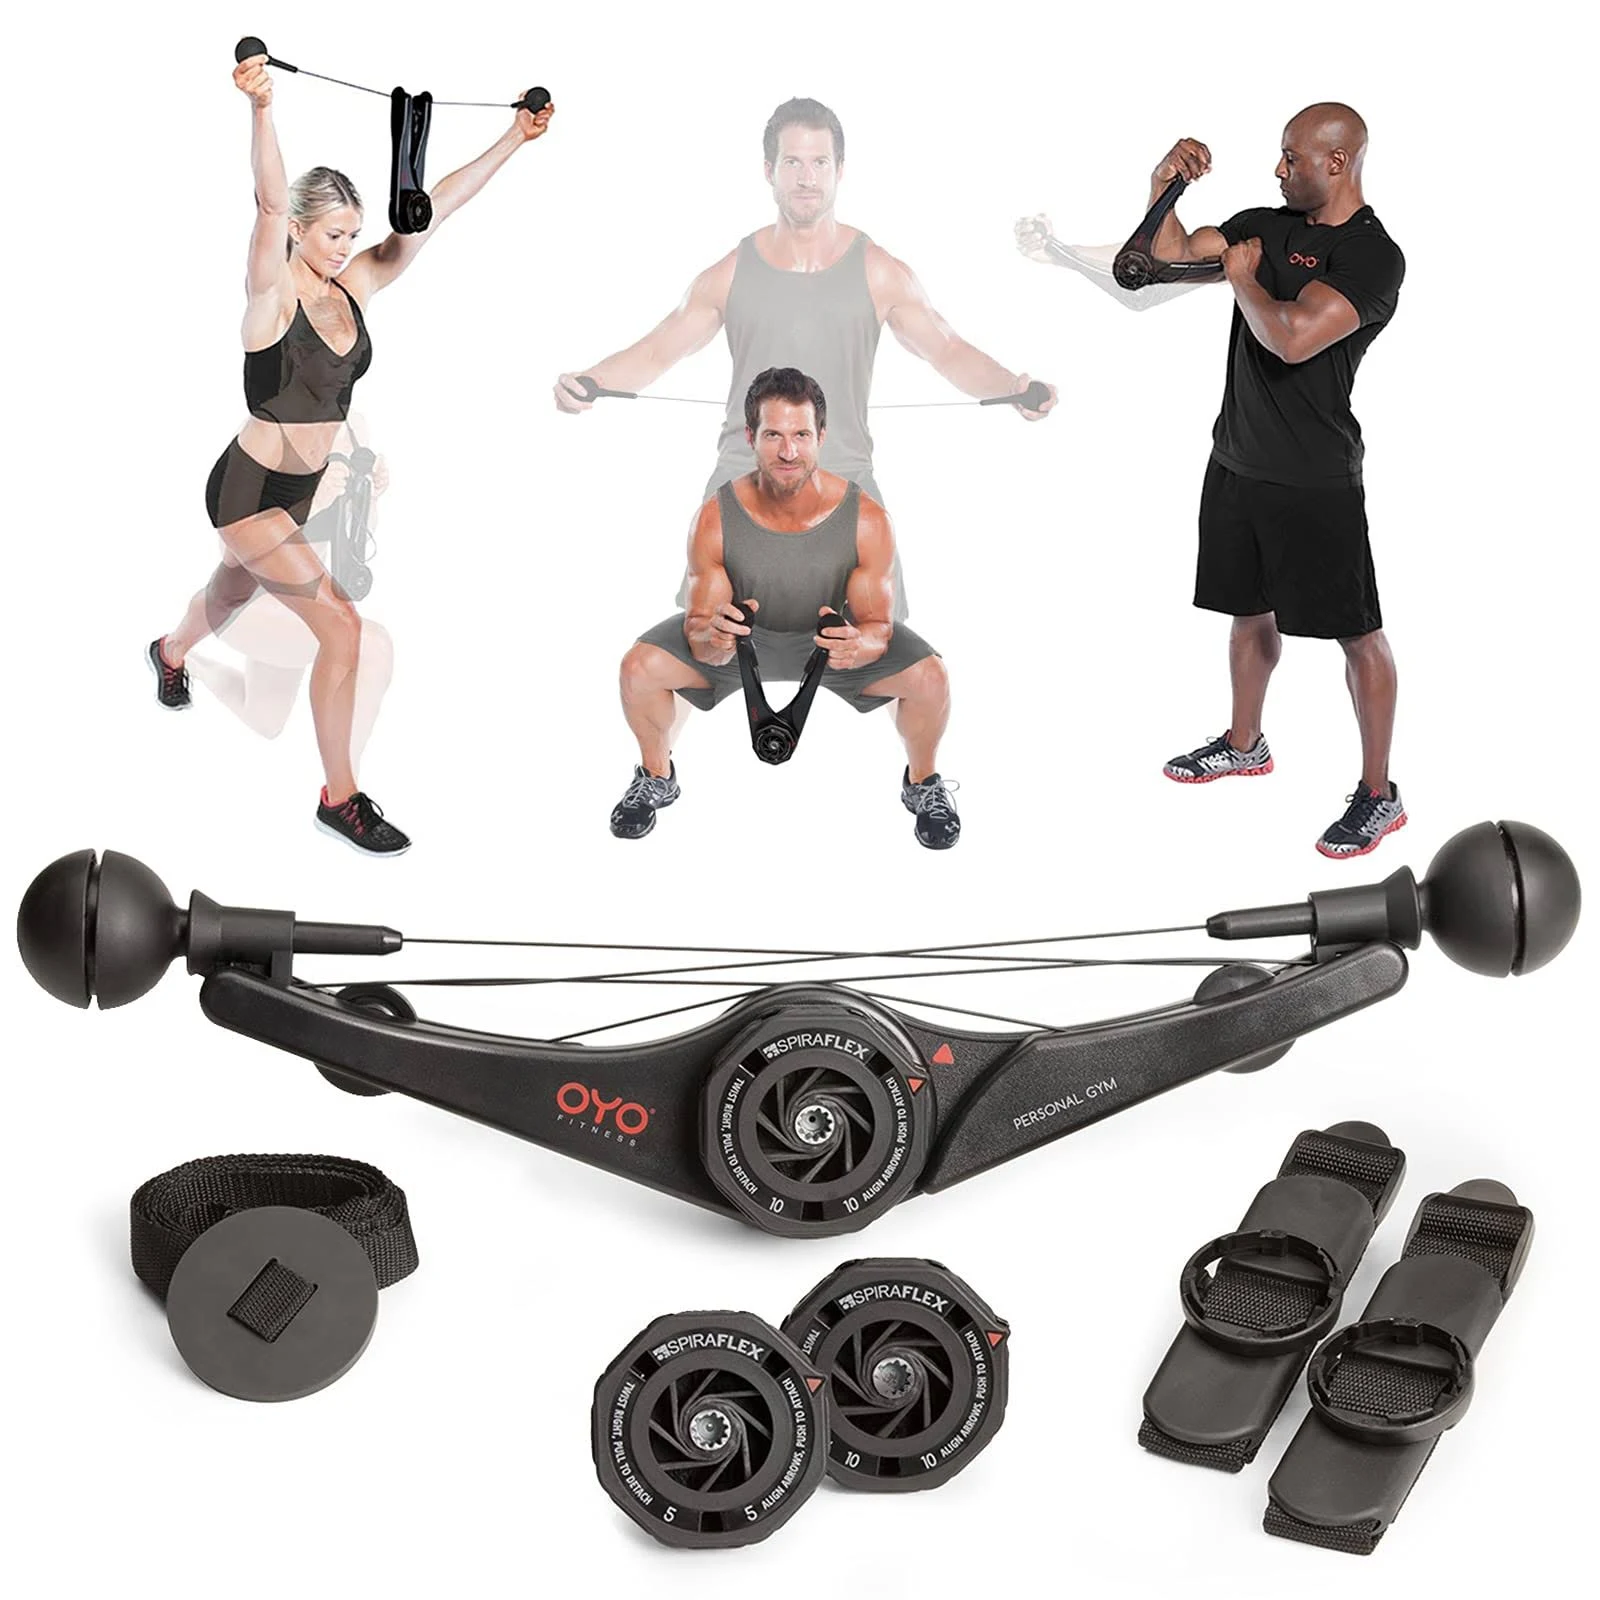 OYO Personal Gym Full Body Portable Gym Equipment Set for Exercise at Home